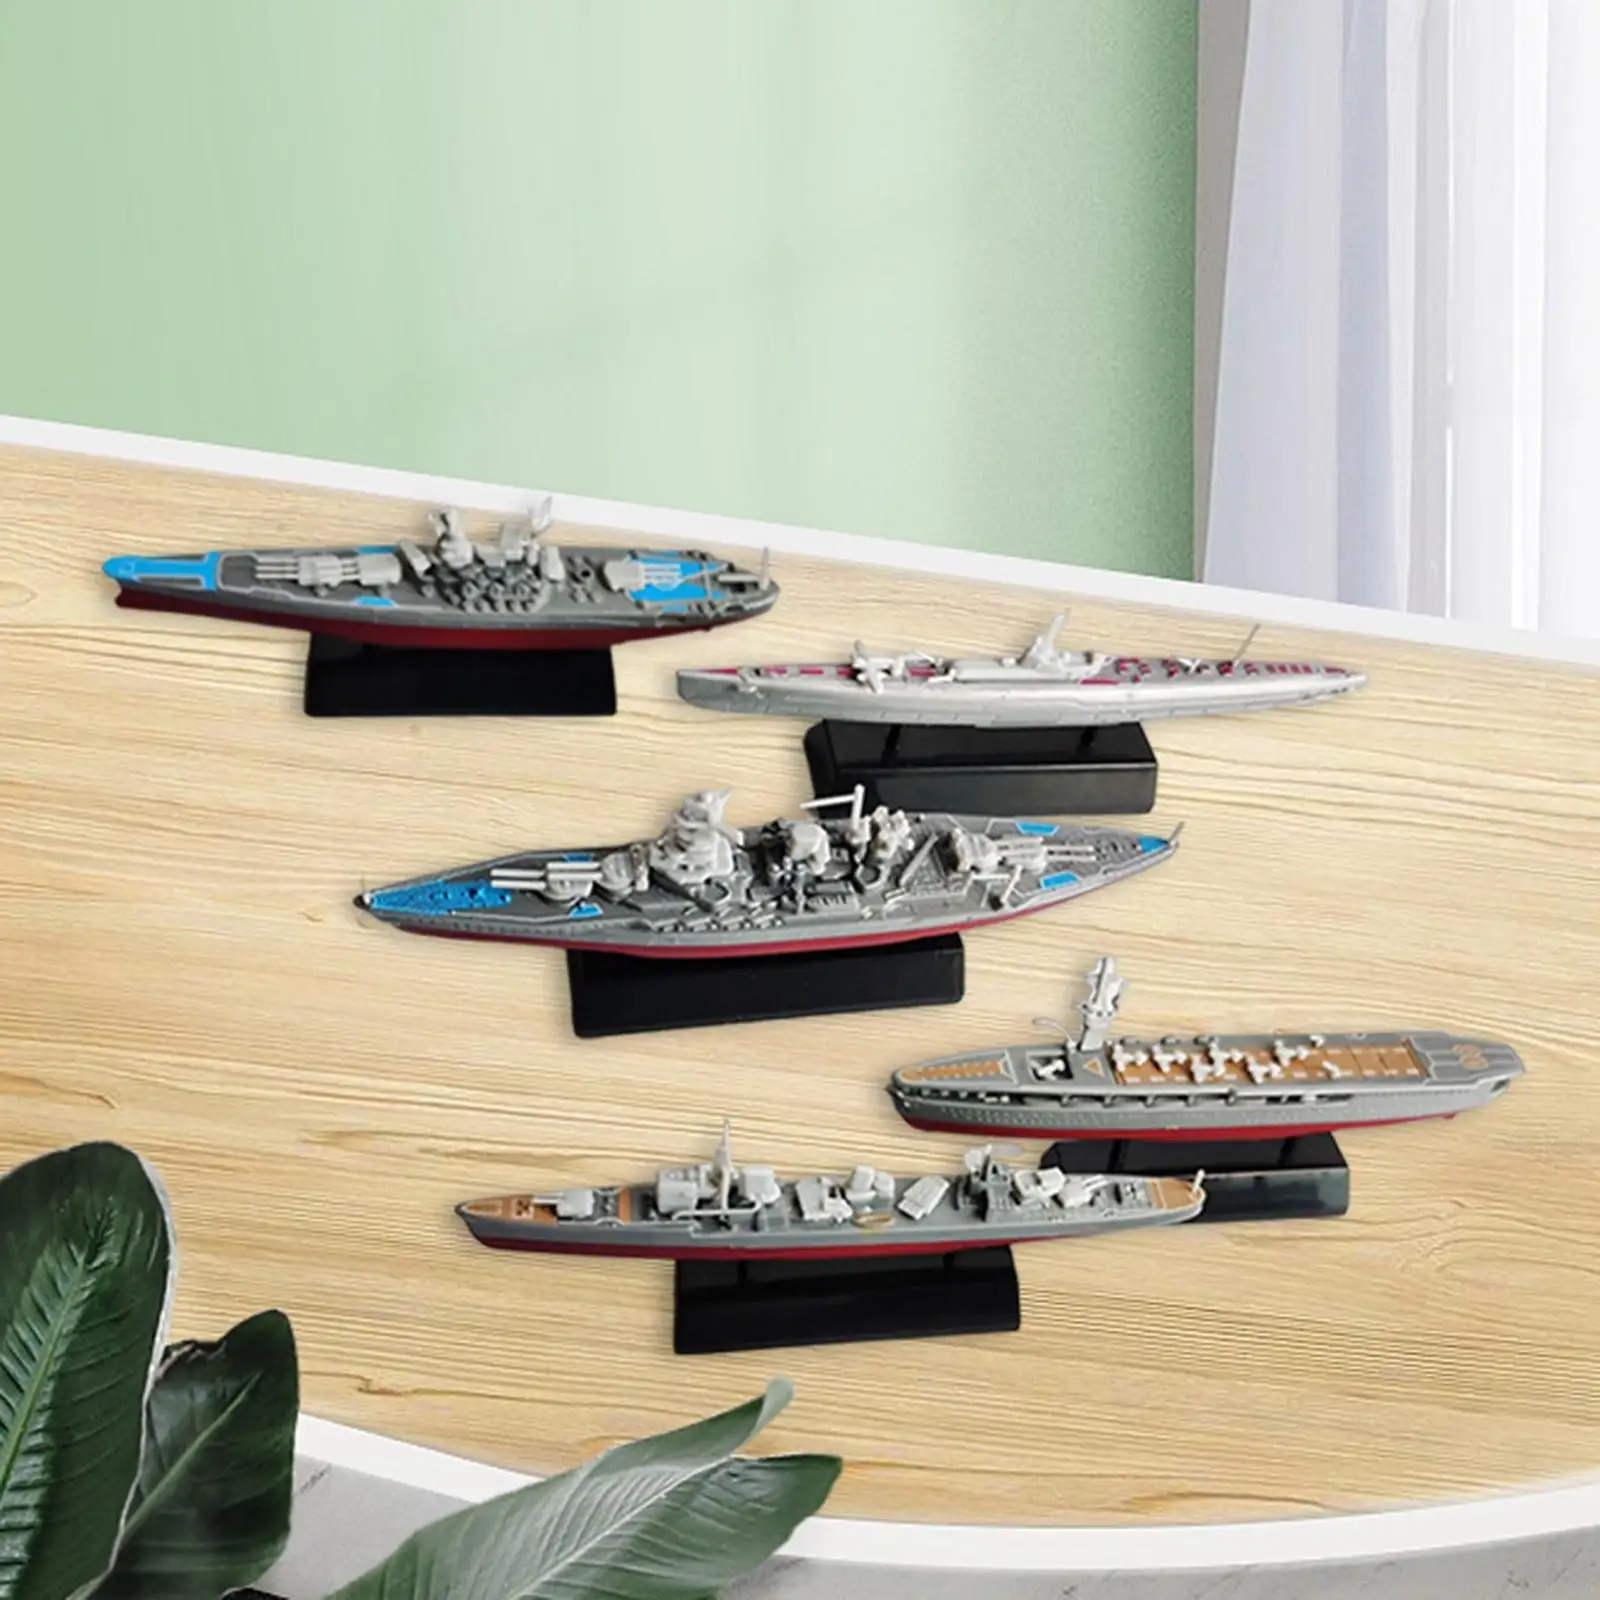 5x Mini Warship Watercraft Model Souvenir Ornaments Gifts Military Display Durable Ship Boat for Book Shelf Teenagers Adult Kids